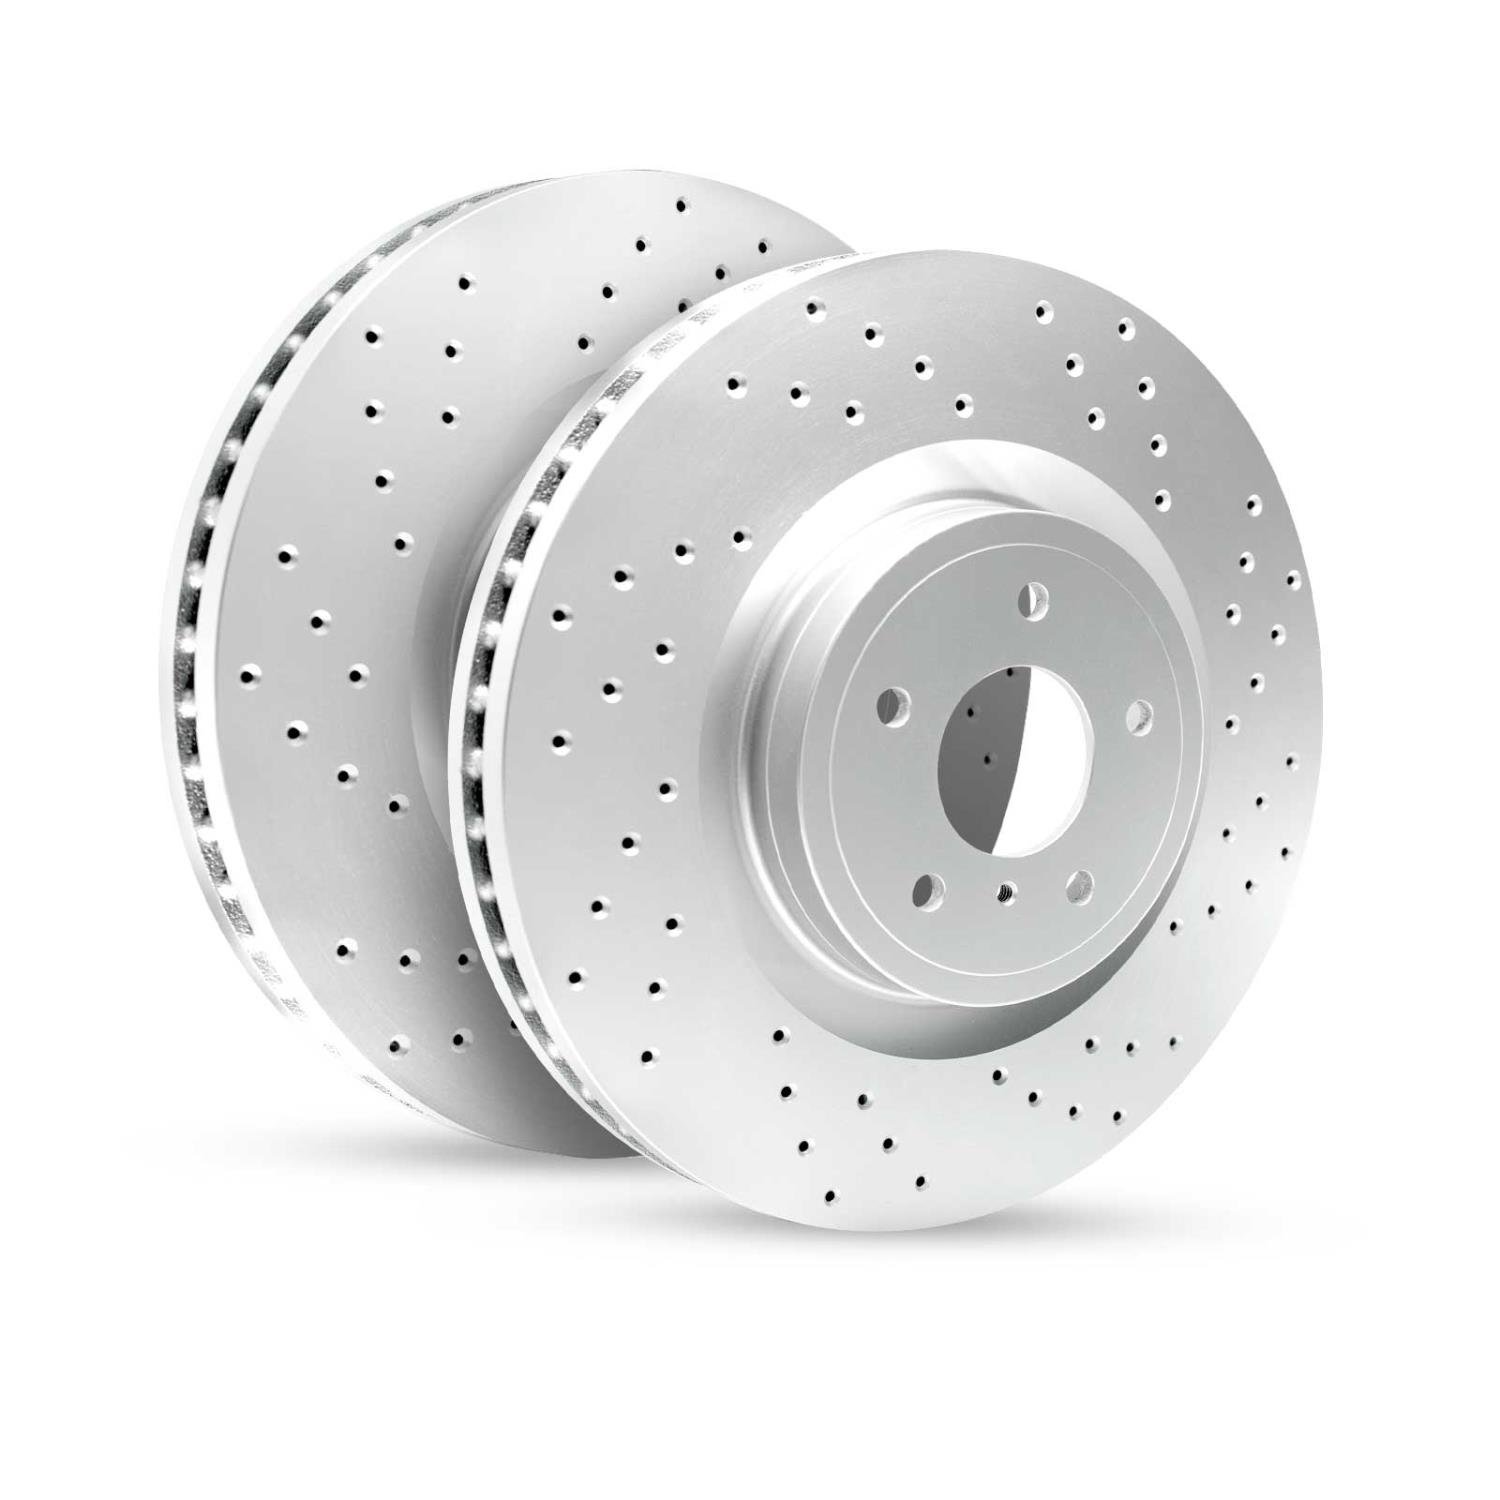 GEO-Carbon Drilled/Slotted Rotors, 2010-2014 BMW, Position: Rear